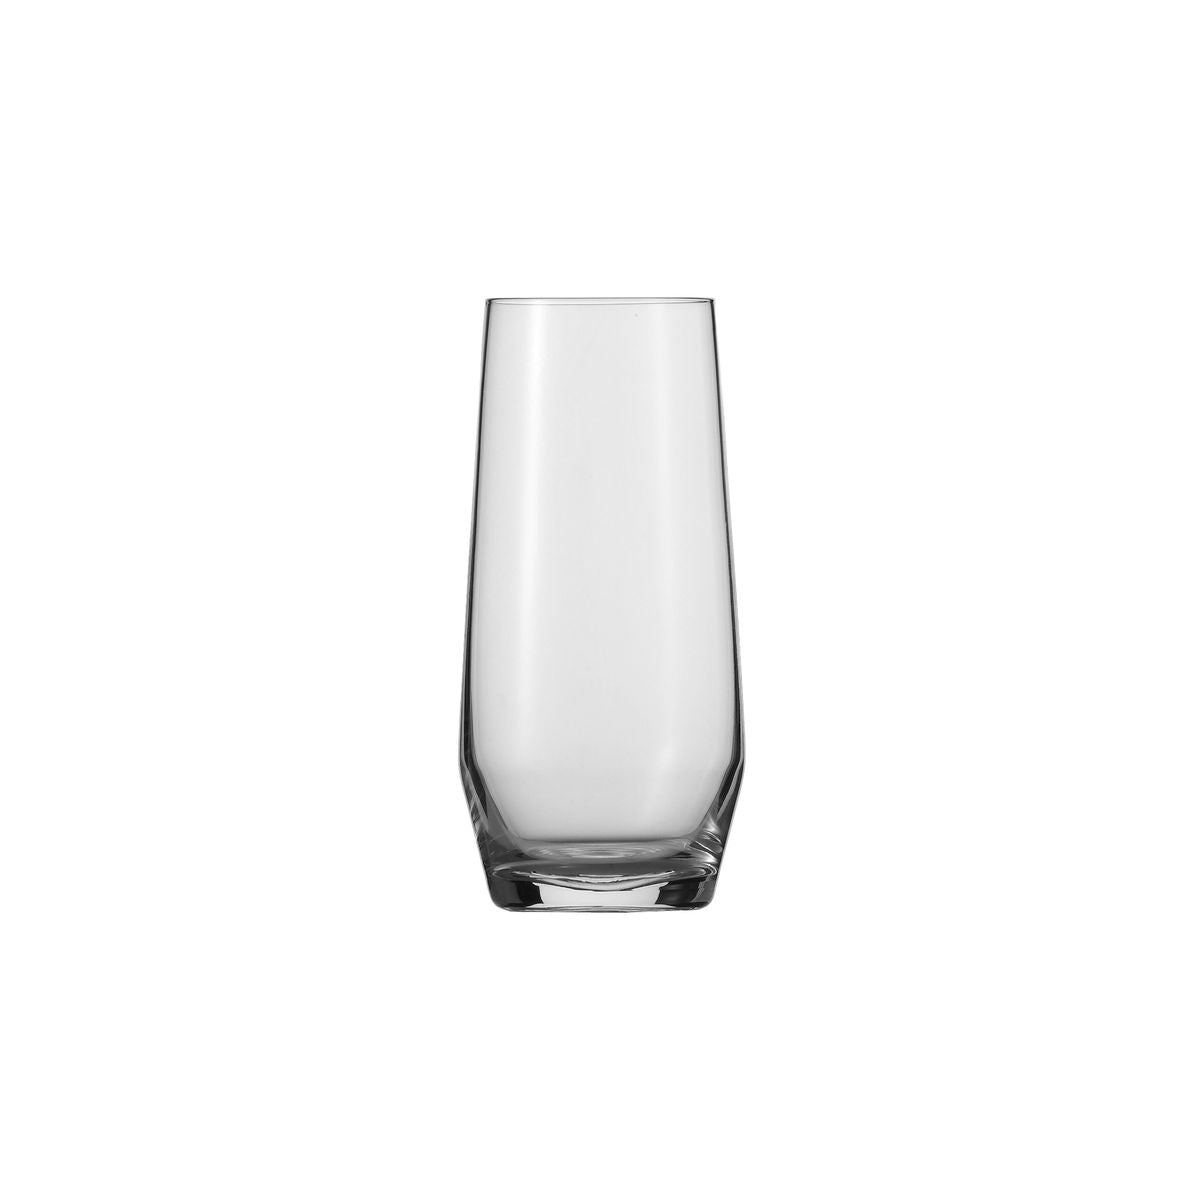 Tumbler - 357Ml, Pure from Schott Zwiesel. made out of Glass and sold in boxes of 6. Hospitality quality at wholesale price with The Flying Fork! 